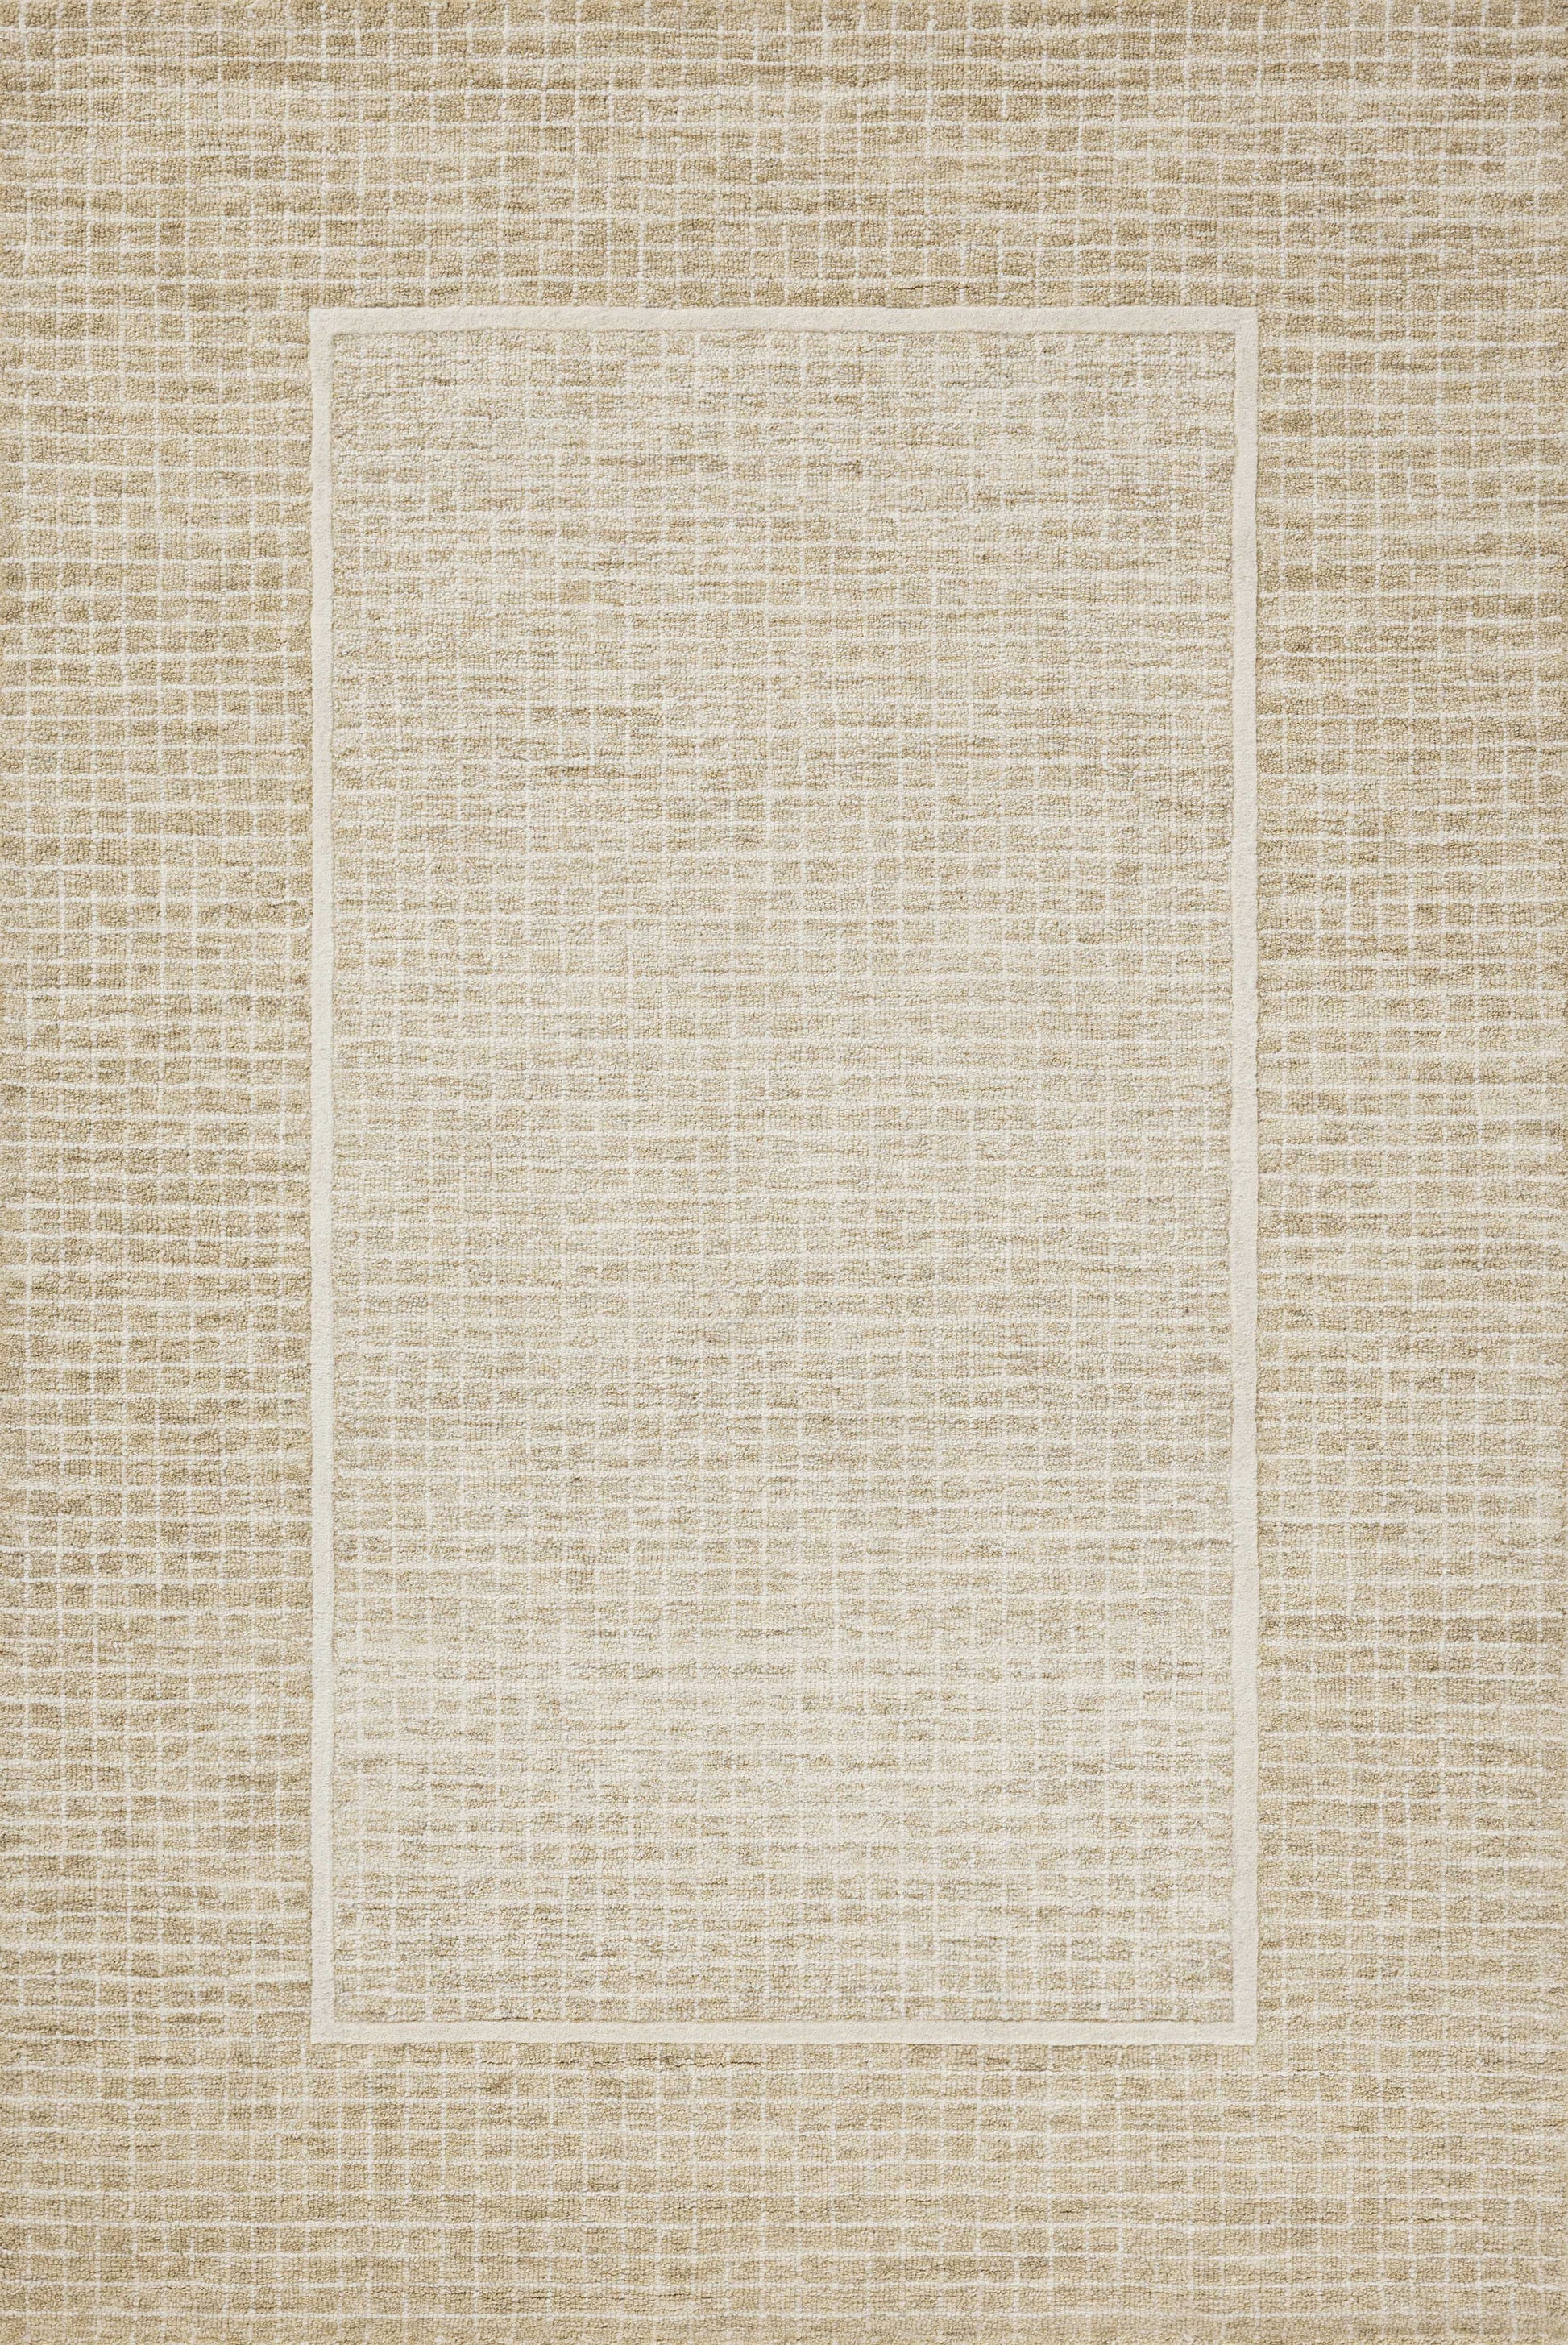 A picture of Loloi's Briggs rug, in style BRG-01, color Wheat / Ivory